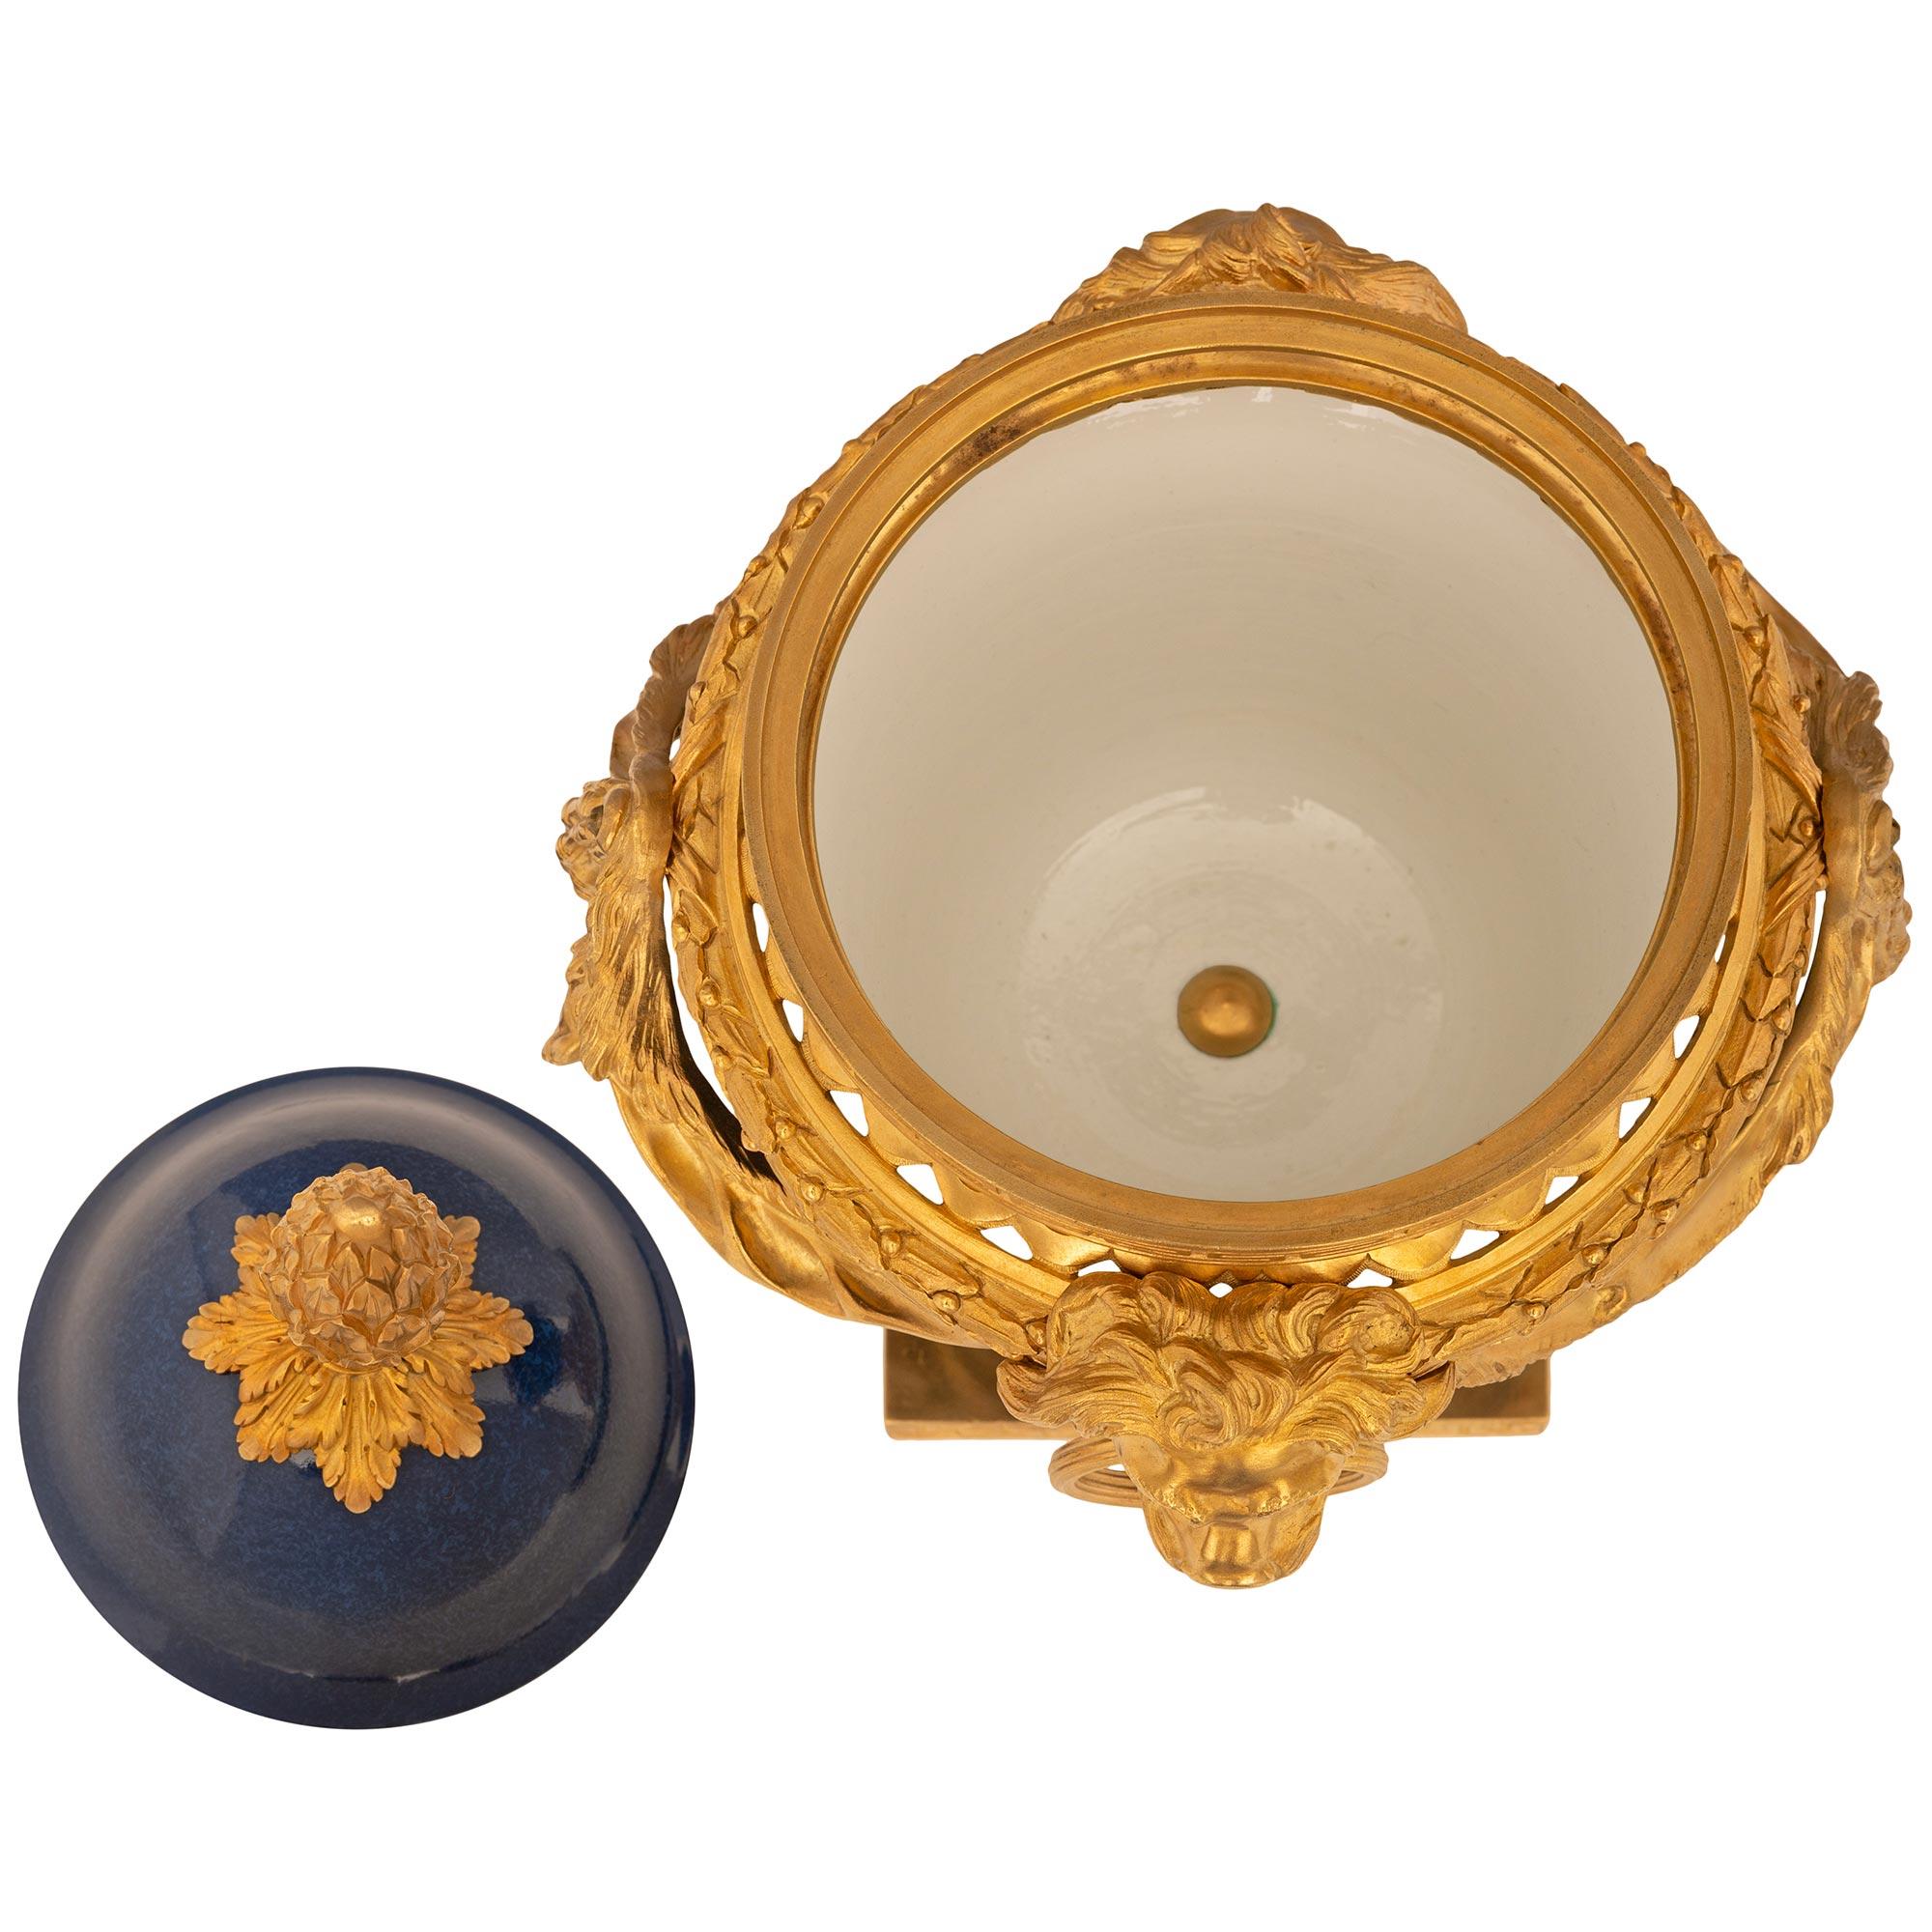 A sensational and most attractive pair of French mid-19th century Louis XVI st. cobalt blue Sèvres porcelain and ormolu pot pourri urns. The pair are raised by a square ormolu base with a Greek key design on the sides. Above is the circular support